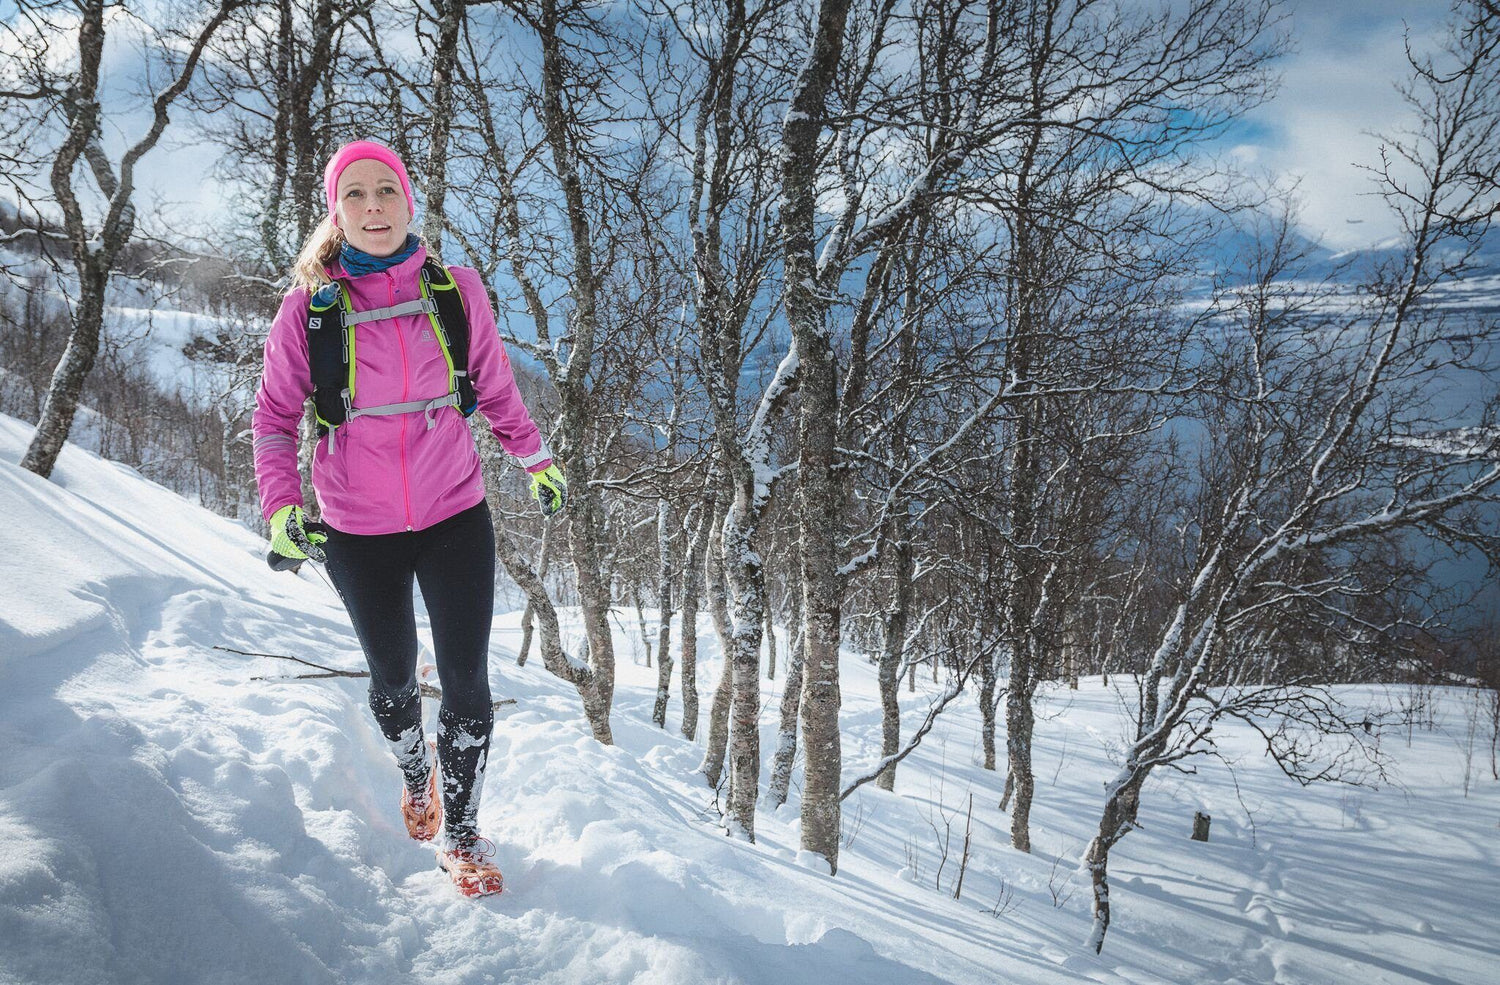 How to Prepare for Winter Running - Story of Saana, a Runner from Tromsø